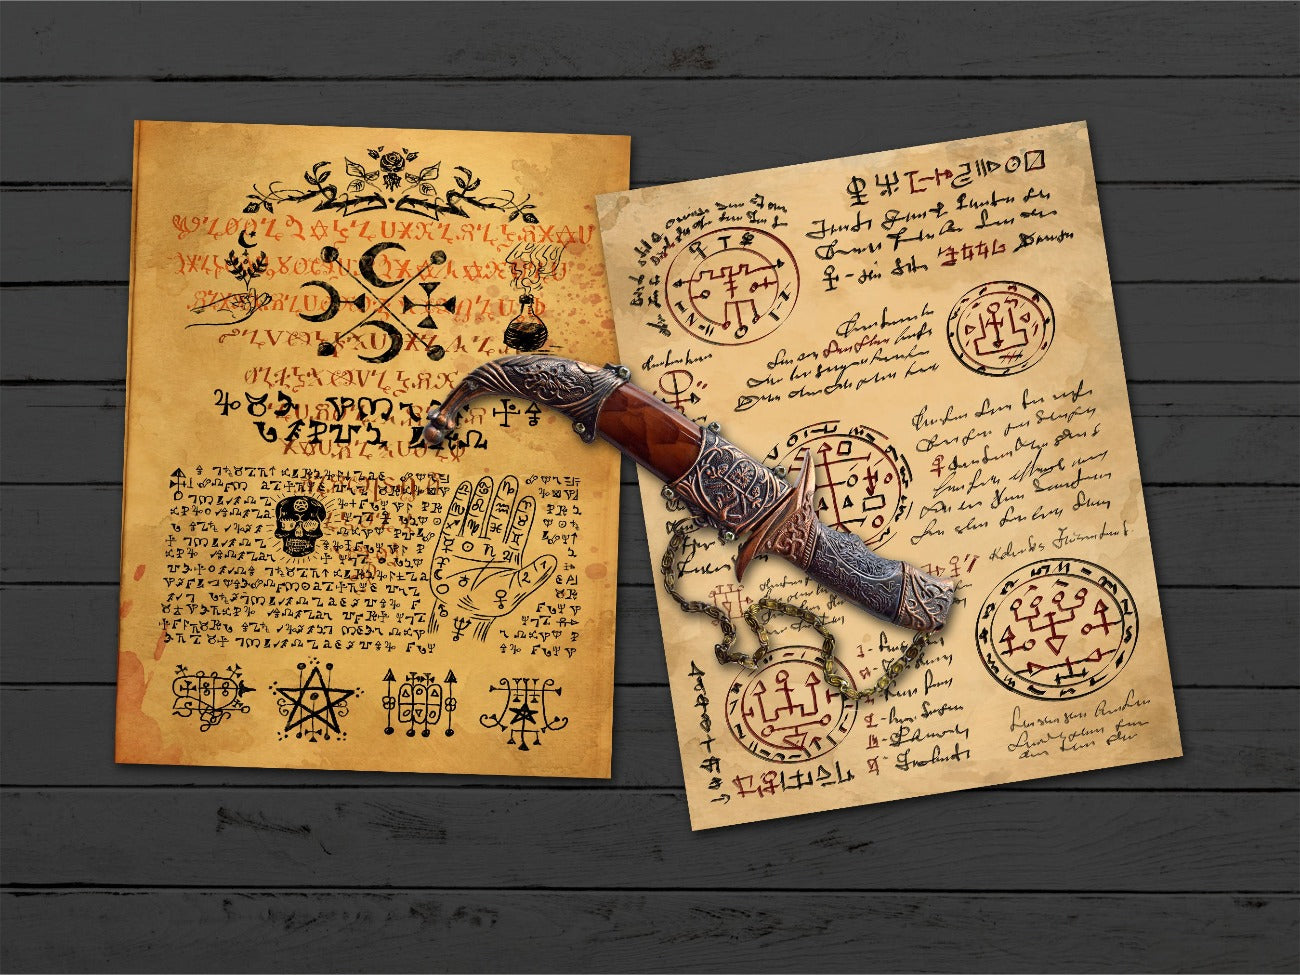 MYSTIC OCCULT, Digital Gothic Pages, Esoteric Supernatural, With Mystical Symbols, Witchy scrapbook, Magic Spellbook, Junk Journal Papers - Morgana Magick Spell